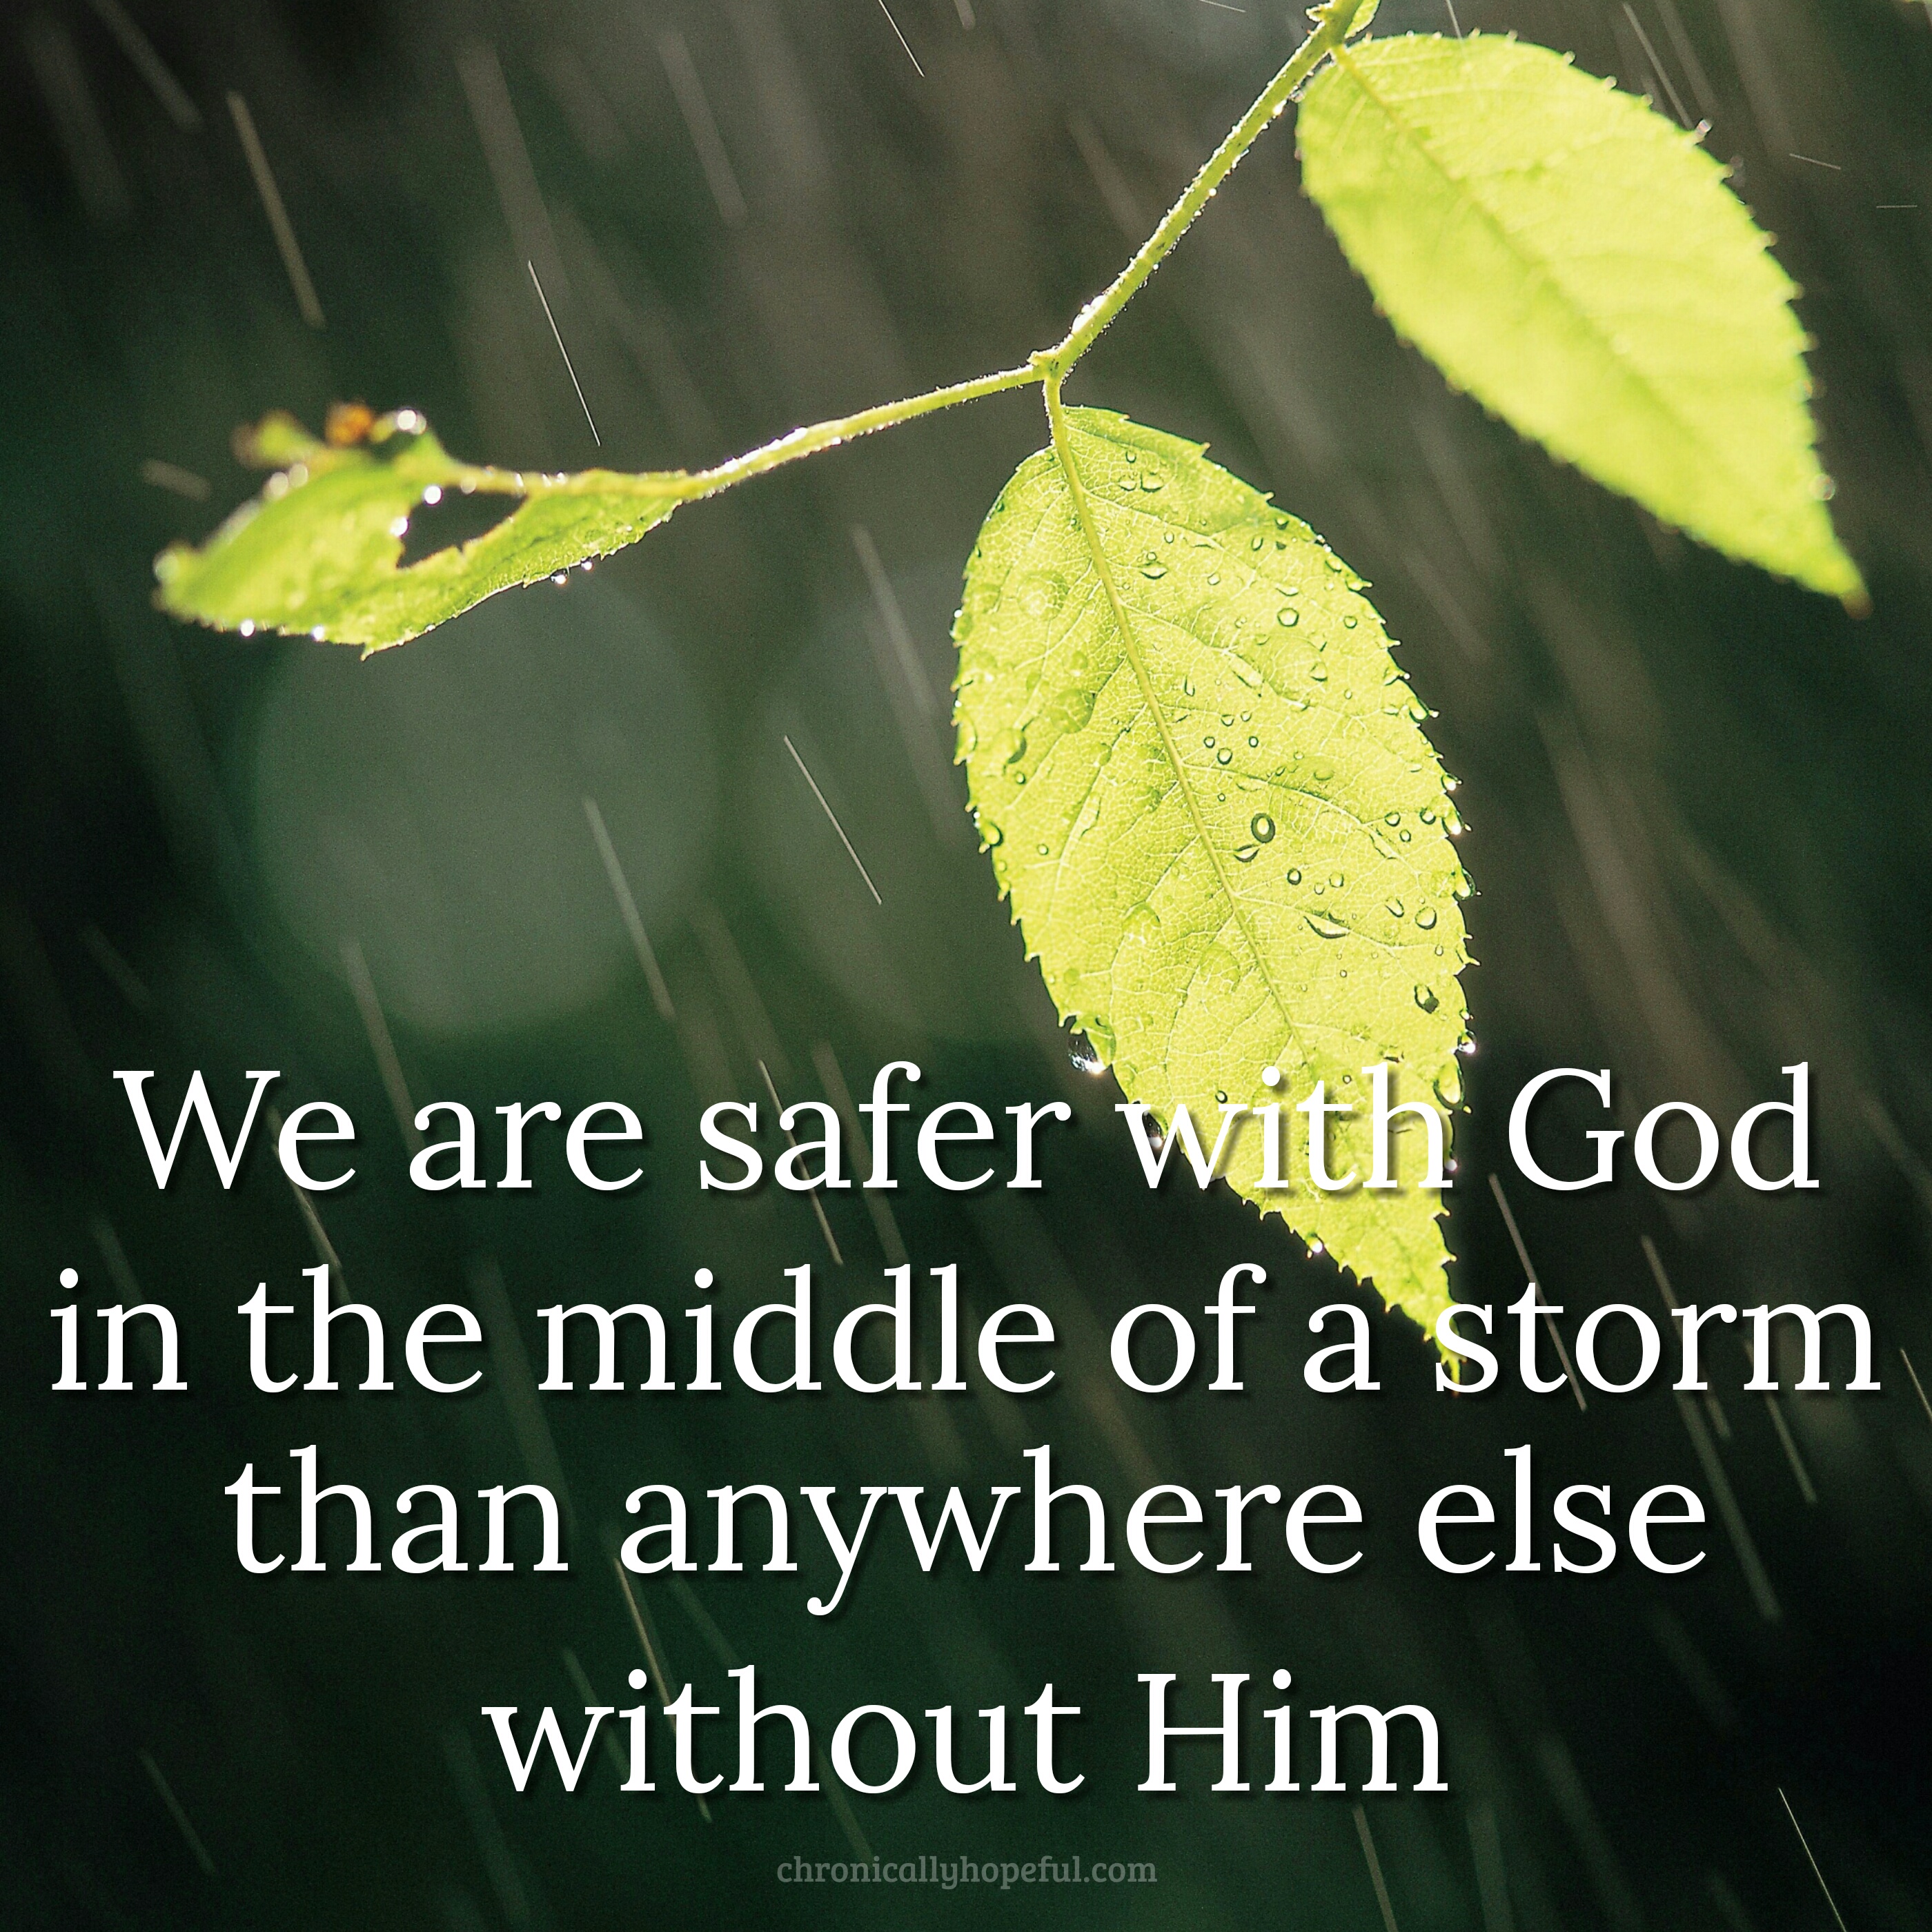 Leaved in a rain storm. Quote reads, We are safer with God in the middle of a storm than anywhere else without him.